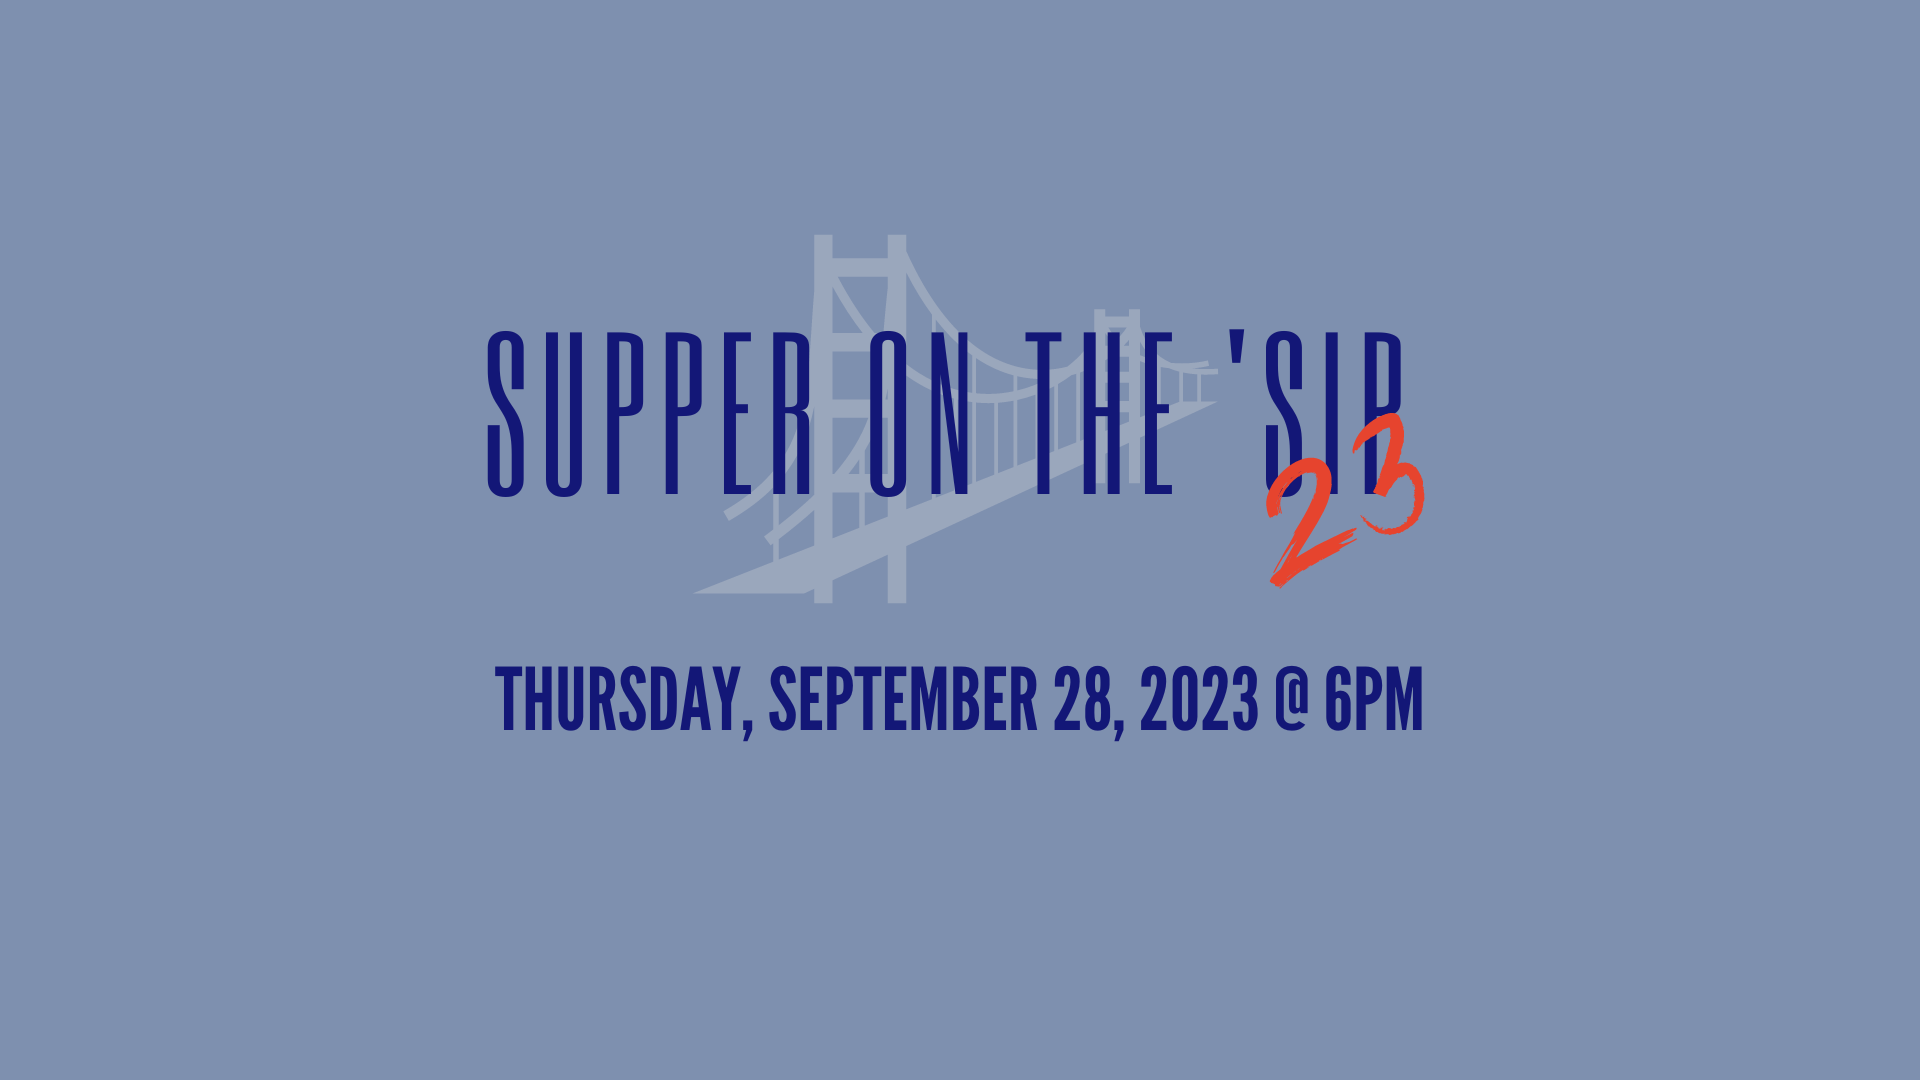 Supper on the Sip flyer